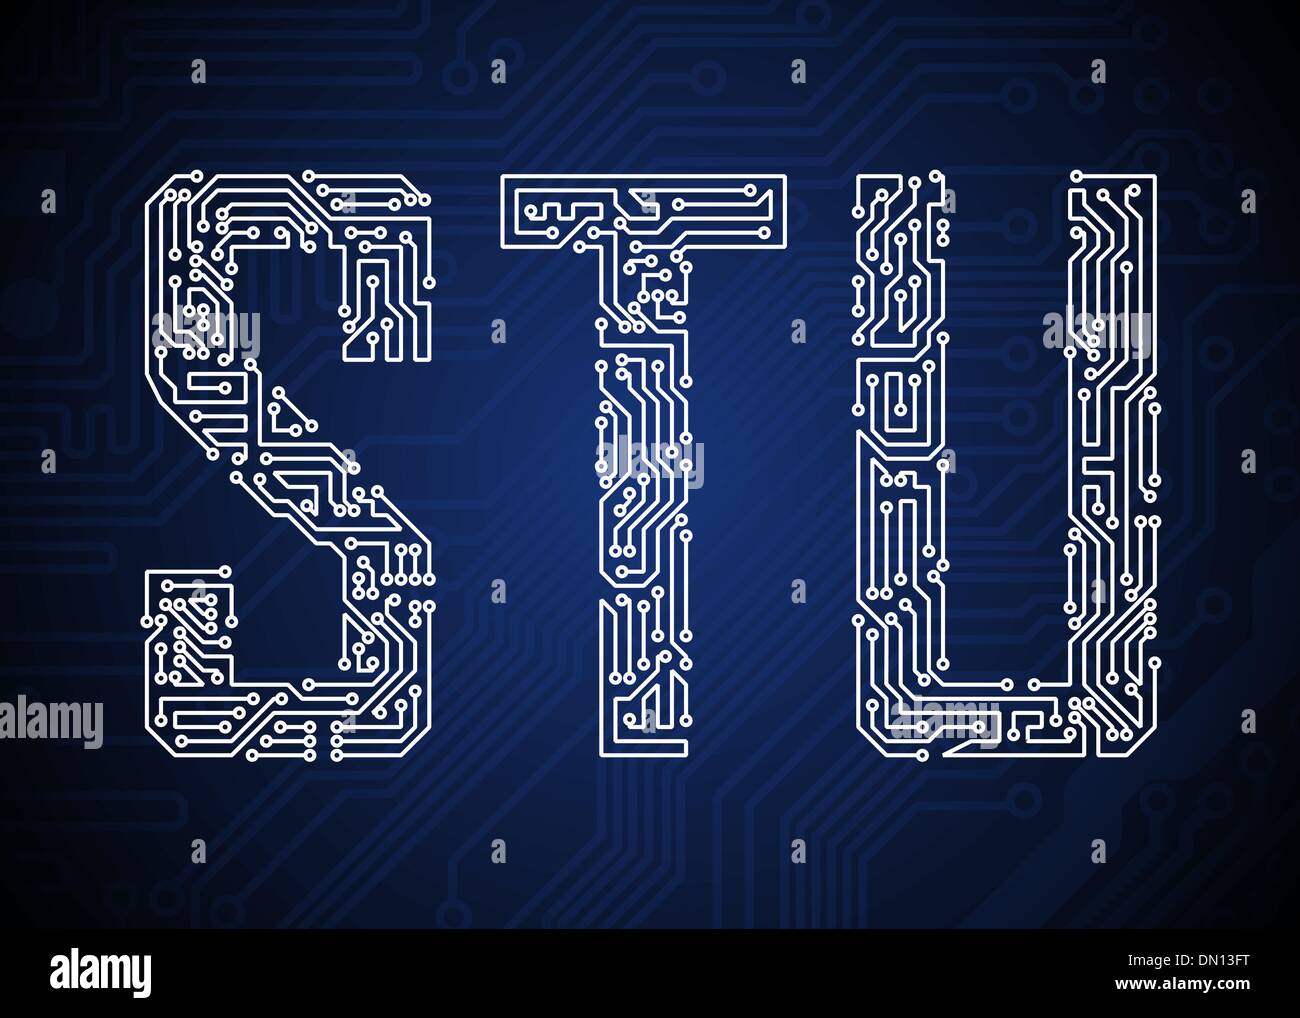 Circuit board letters Stock Vector